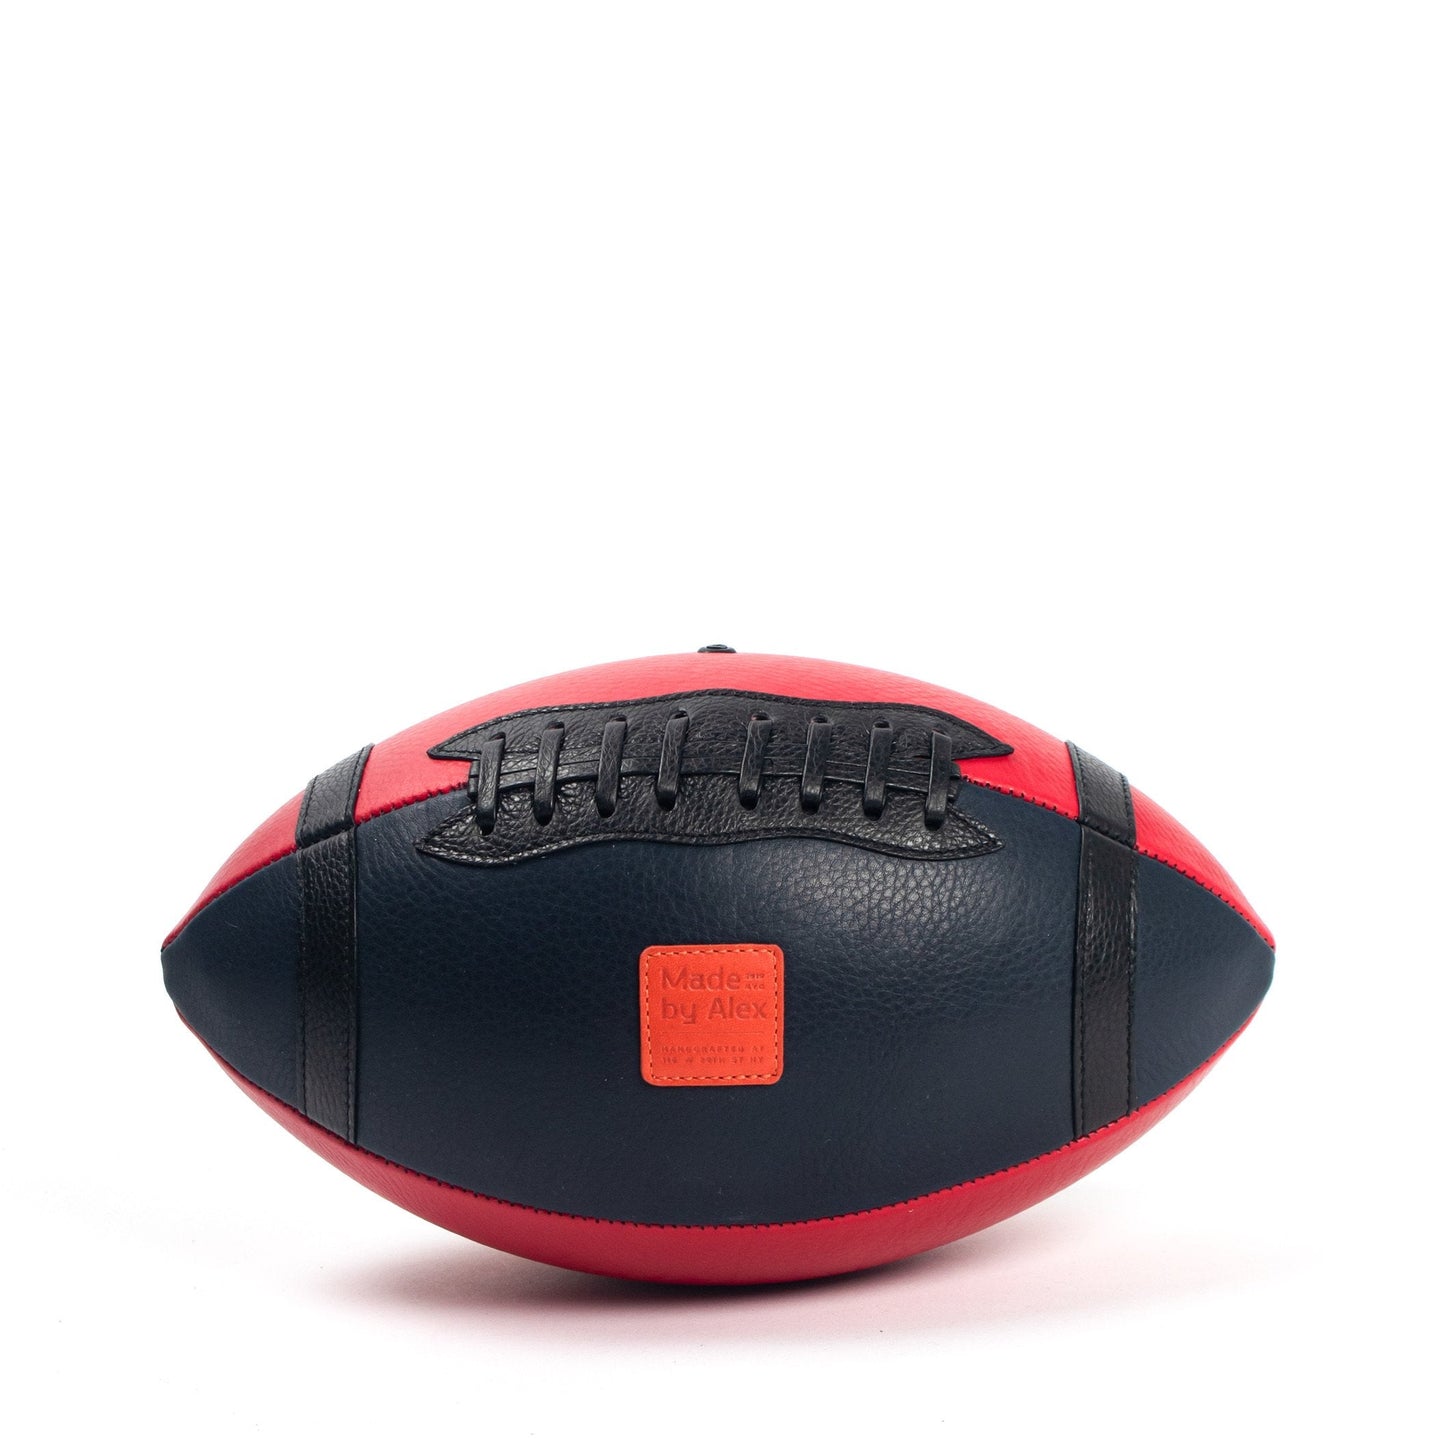 Houston Team Football - Athletics Made in USA | Made By Alex